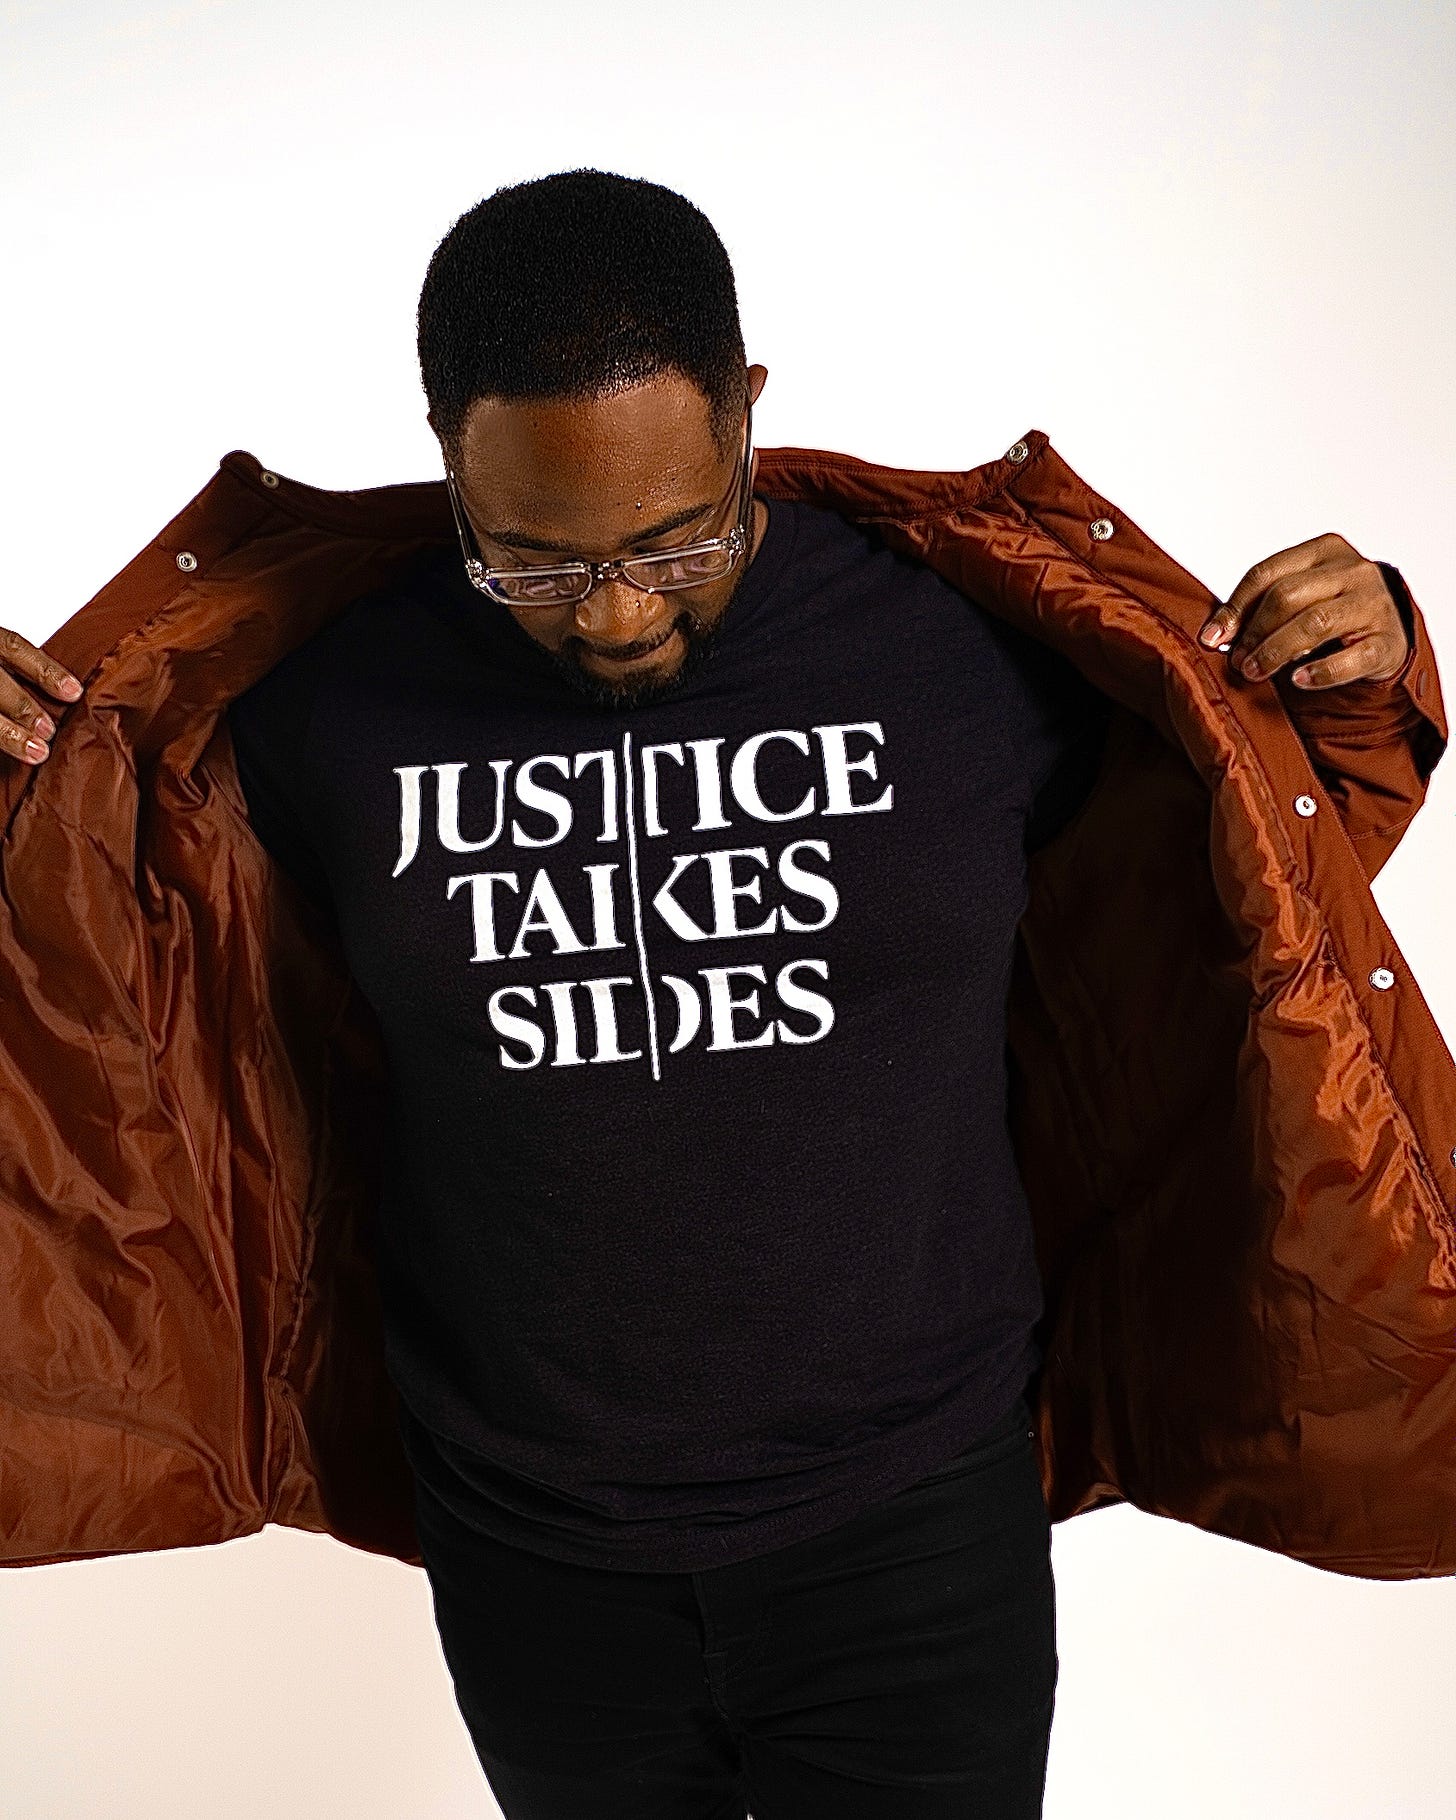 Photo of Jemar Tisby in front of white background wearing black "Justice Takes Sides" shirt